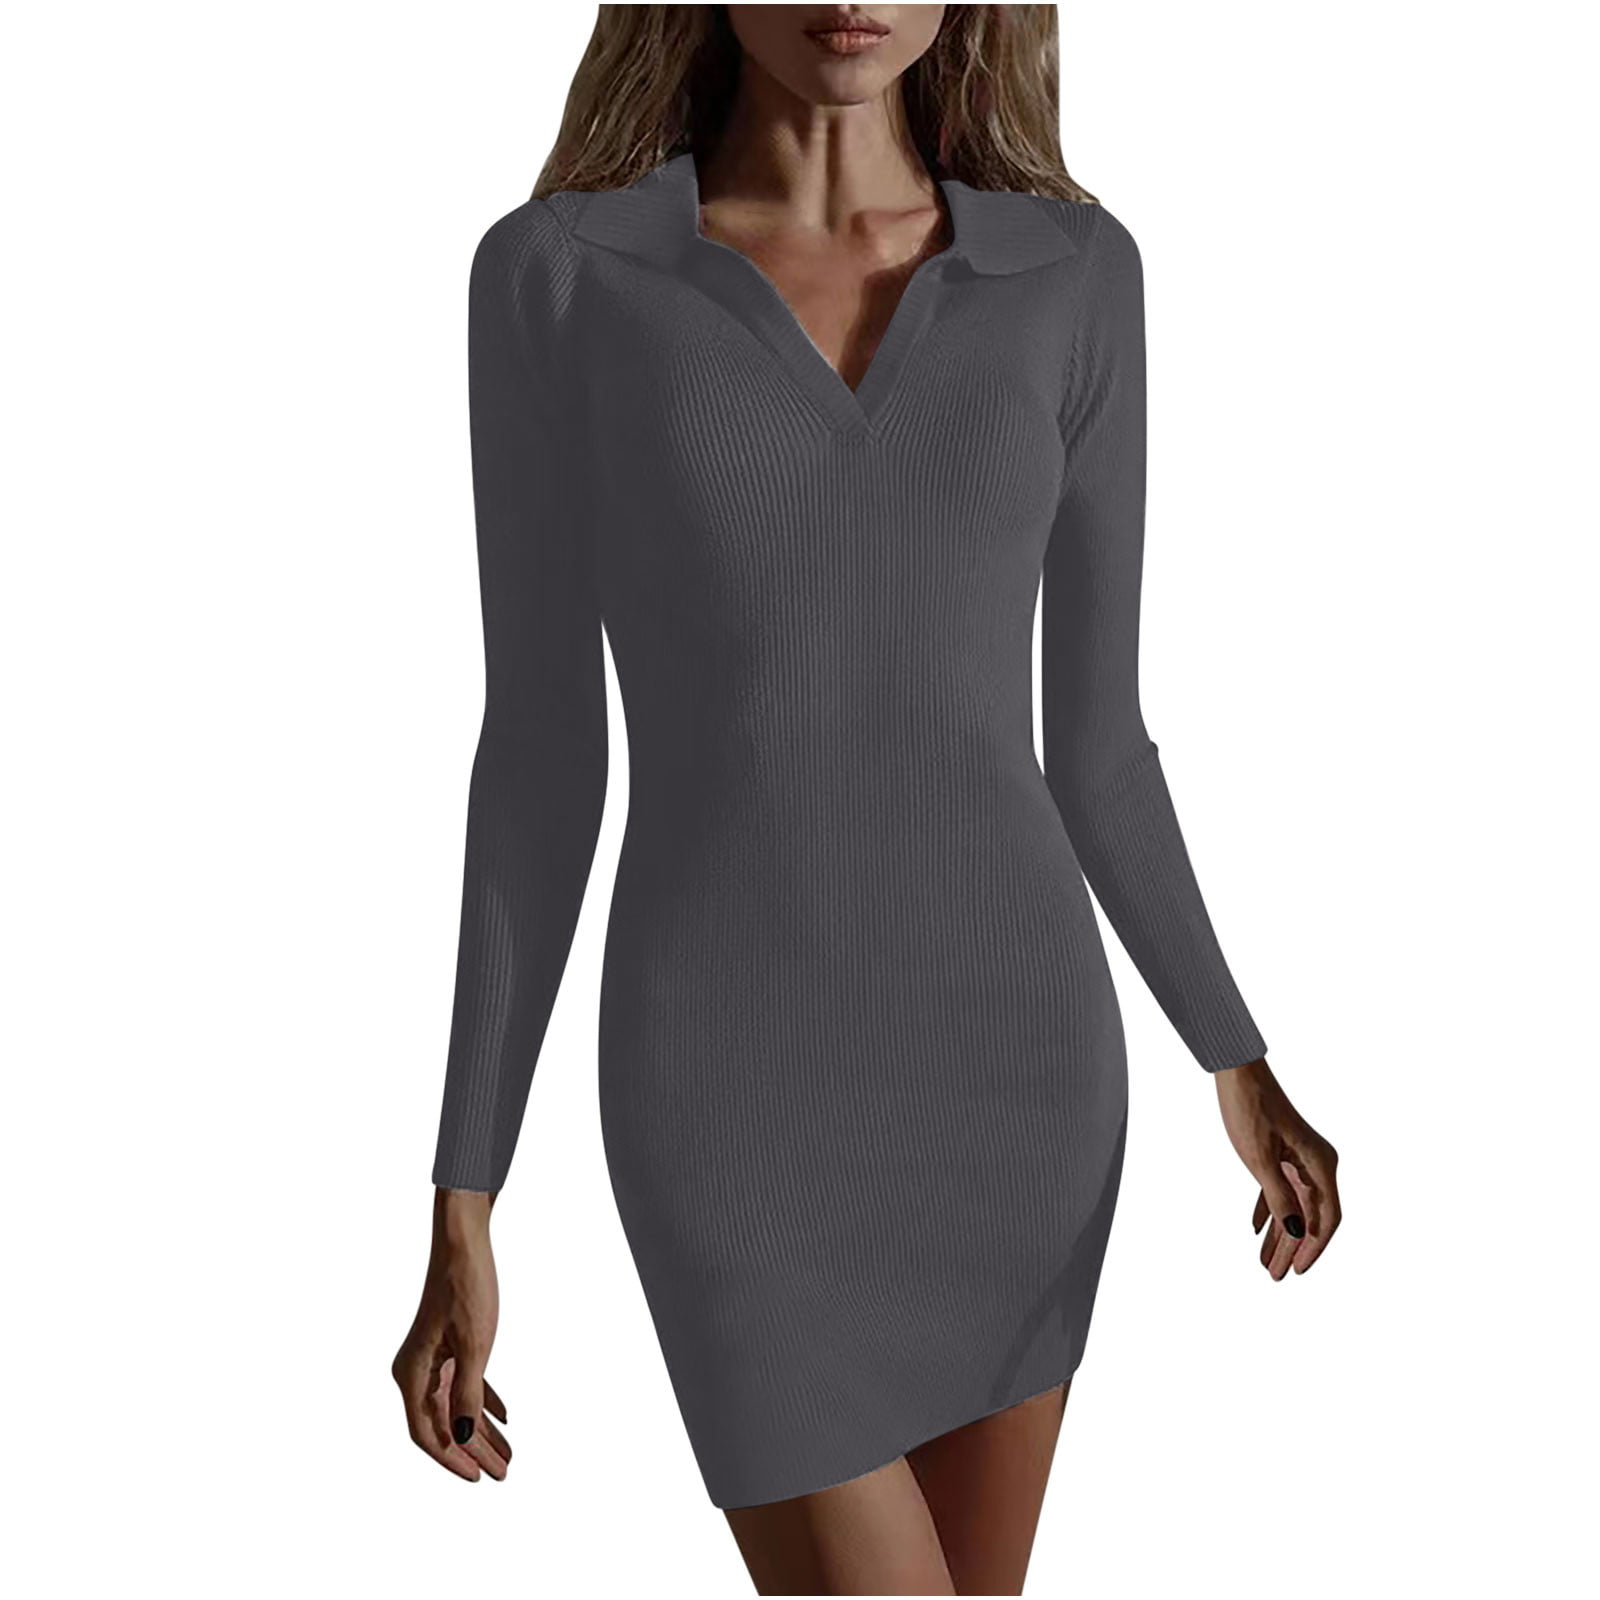 Clearance! Summer Dresses for Women 2023, Club Outfits for Women, Wrap  Dress for Women, Black Mini Dress, Winter Outfits for Women 2023,  Graduation